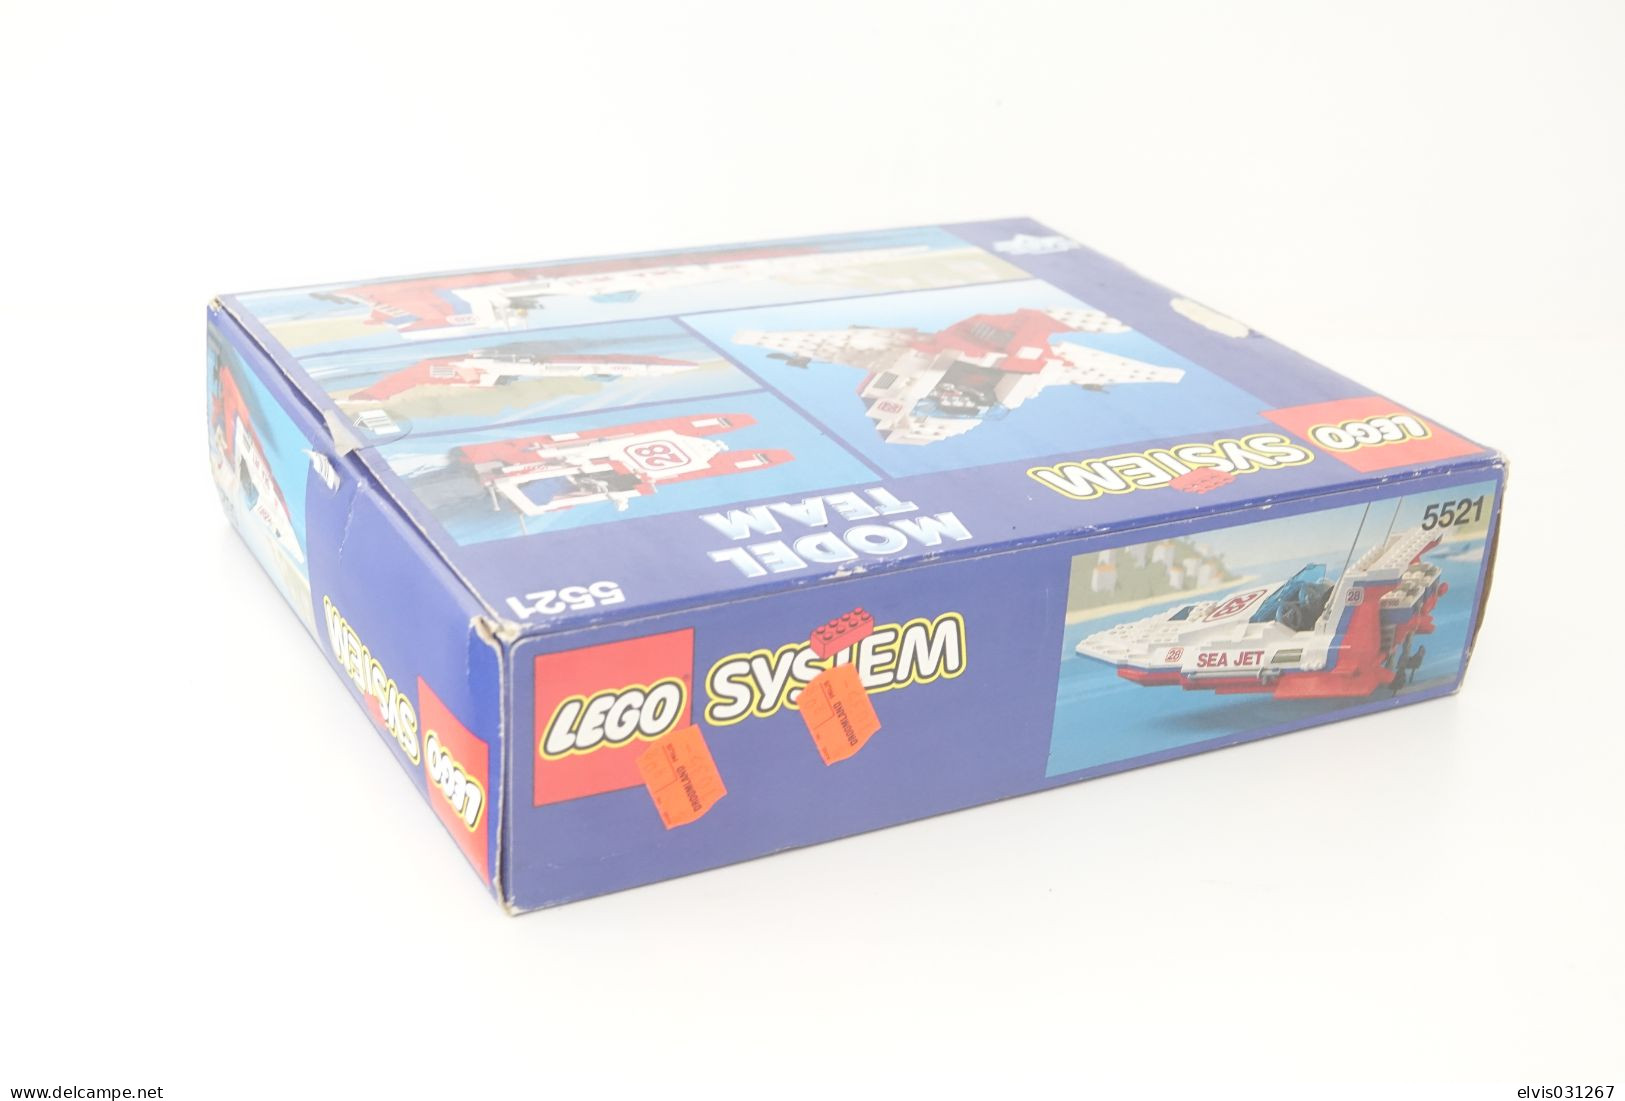 LEGO - 5521 Sea Jet with box and manual booklet - Original Lego 1993 - Vintage